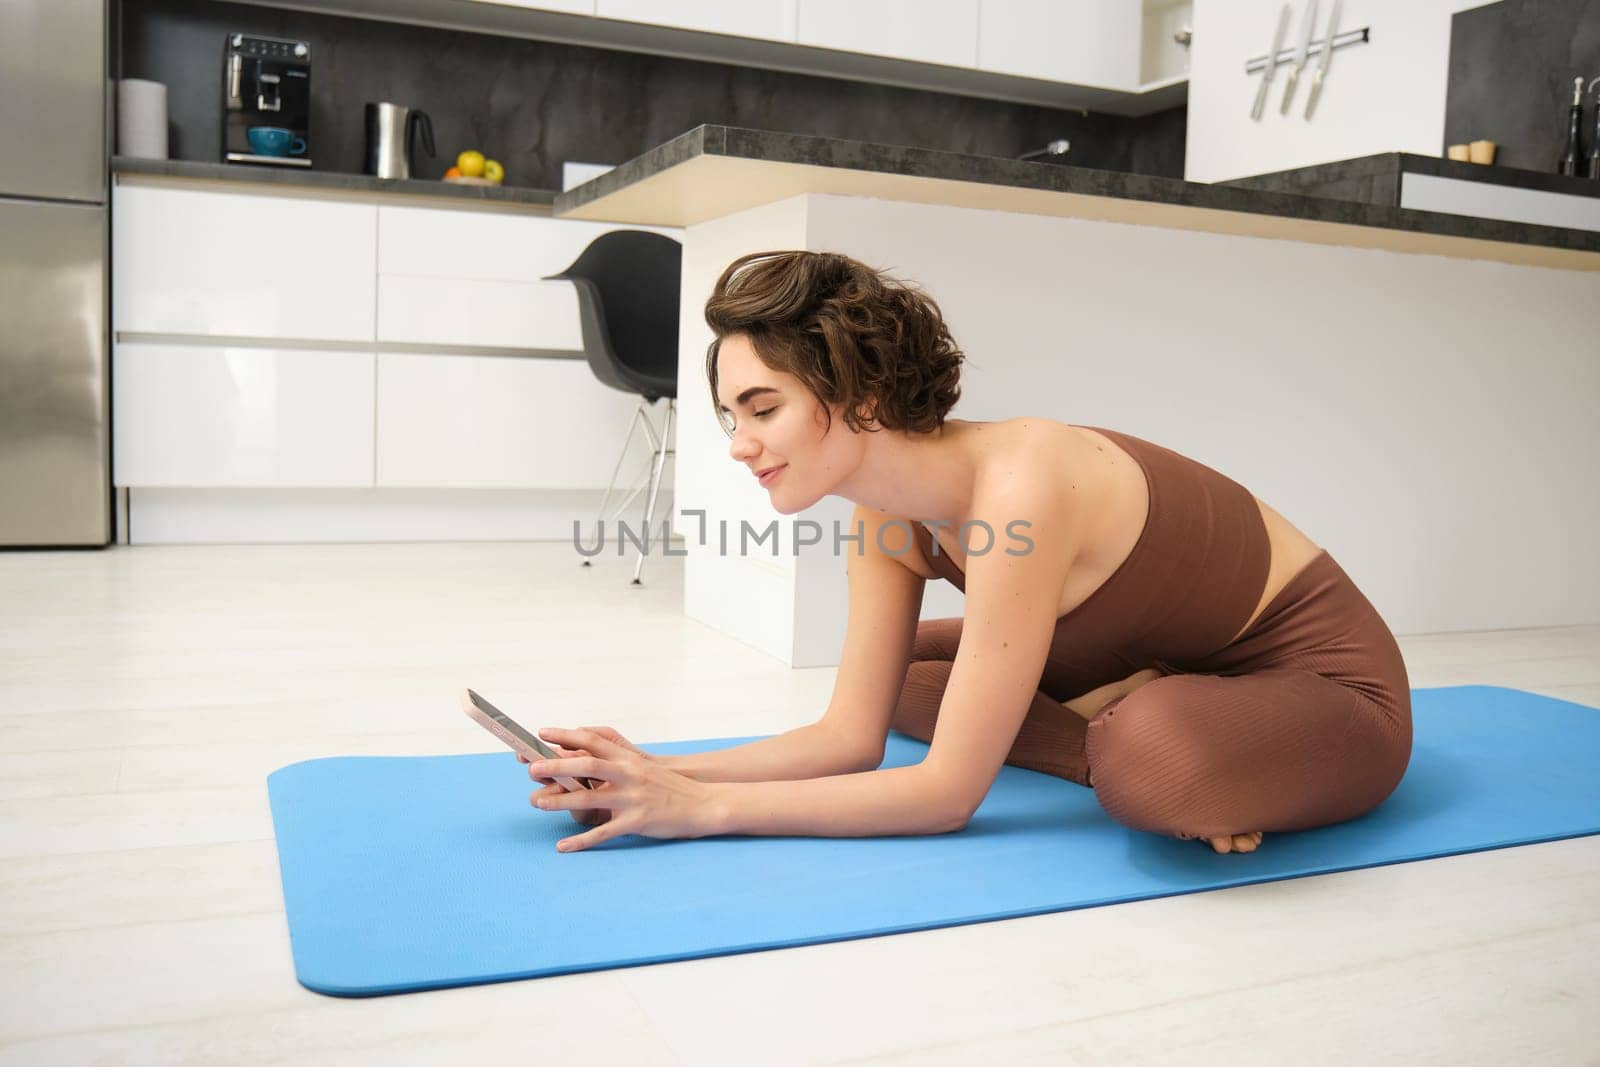 Portrait of fitness woman in leggings and sportsbra, sits in kitchen and does workout on yoga mat, looks at mobile phone, exercise from home with smartphone app.